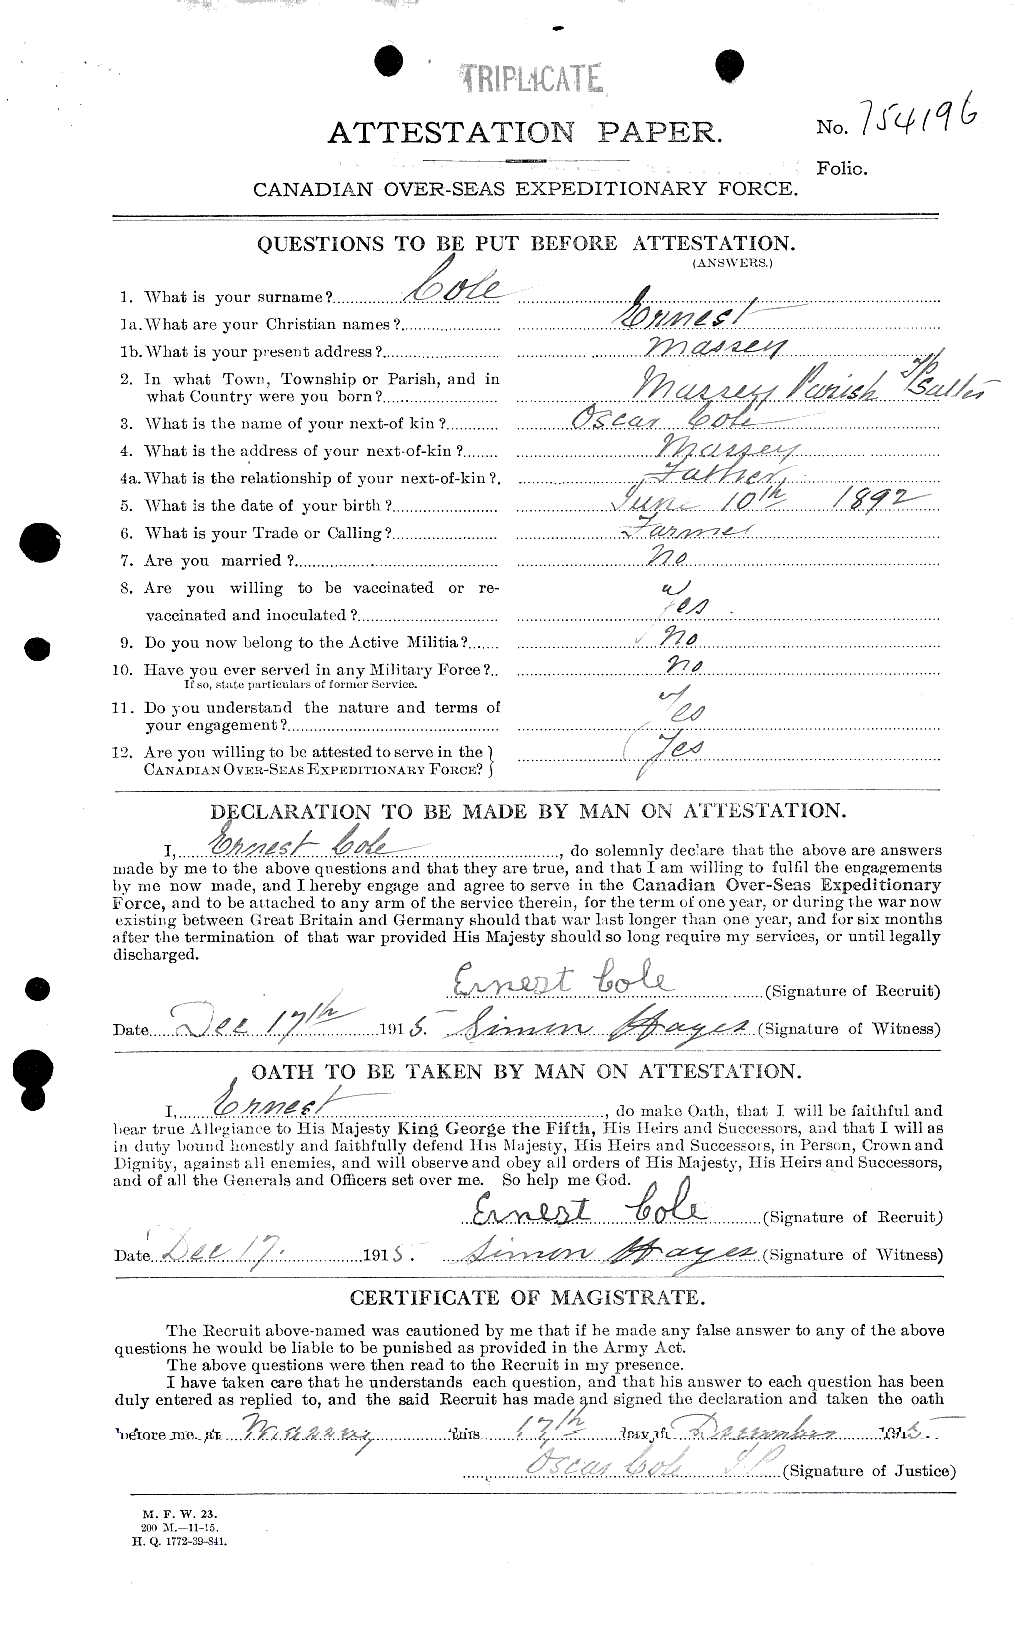 Personnel Records of the First World War - CEF 027696a